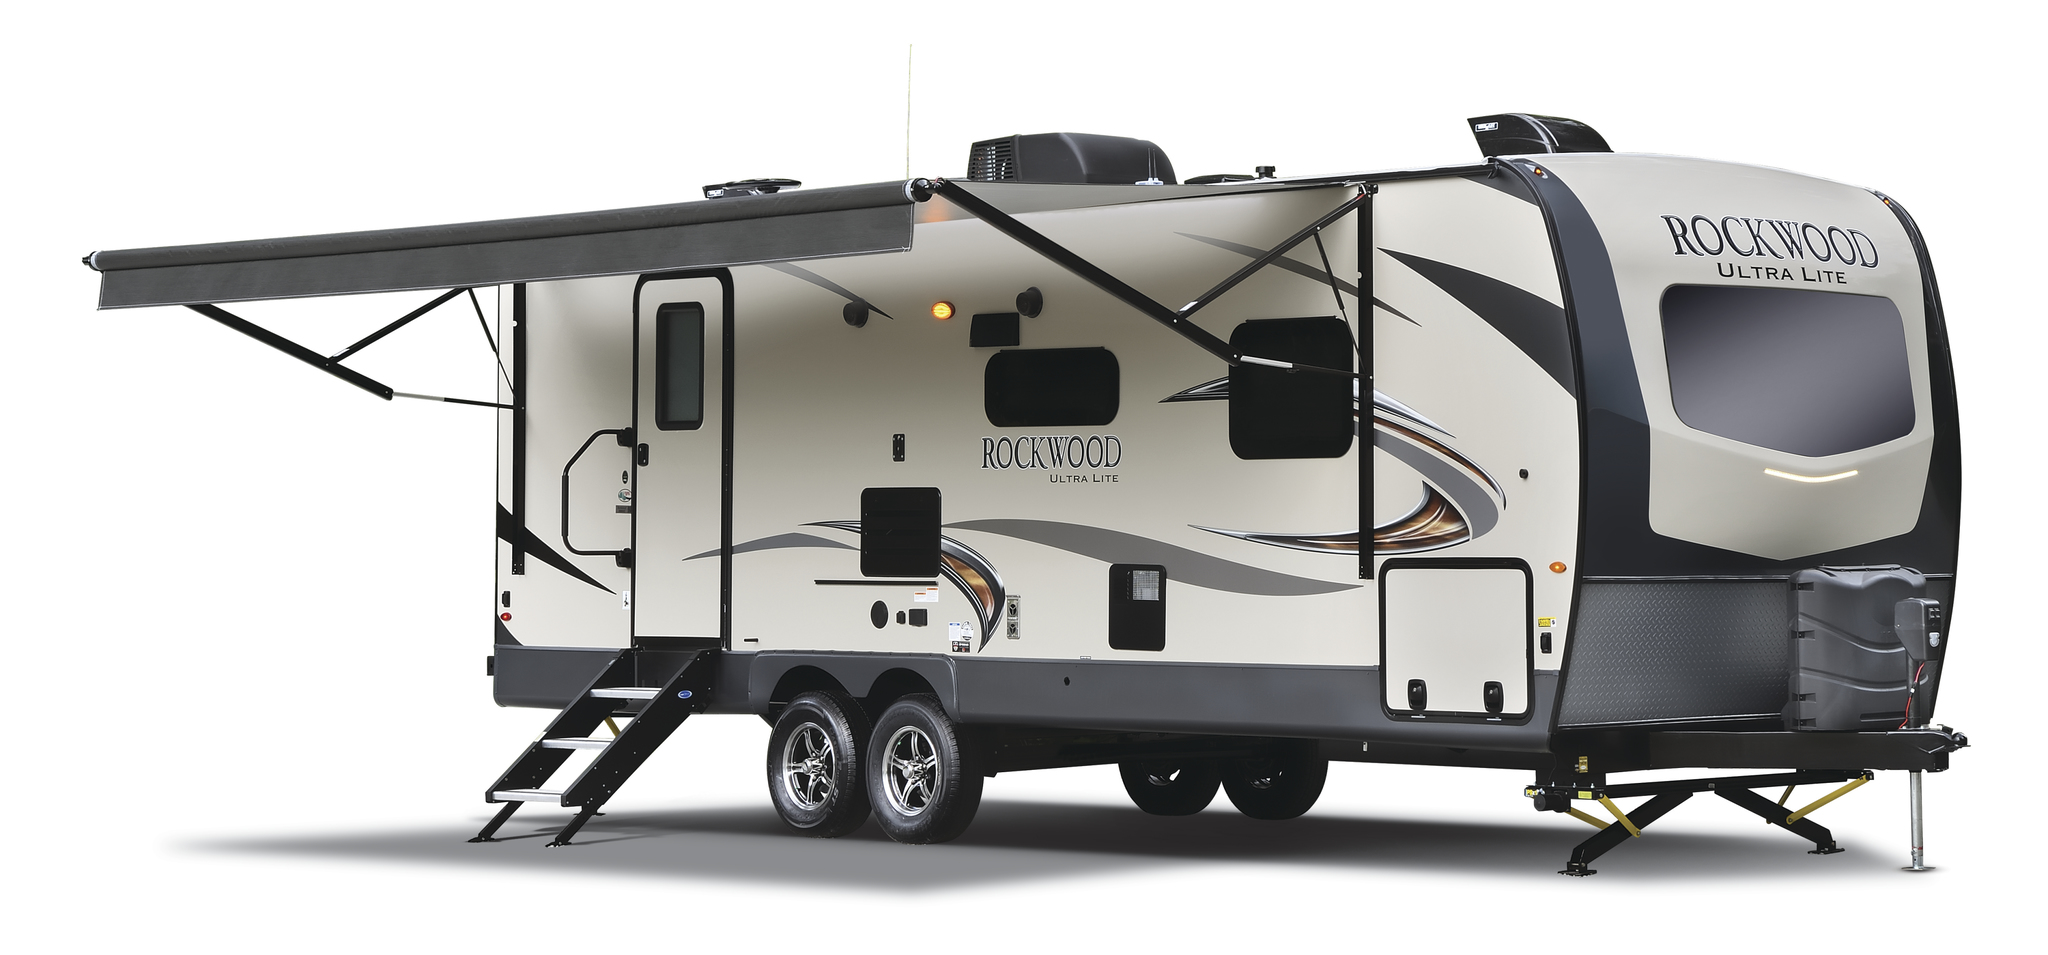 rockwood travel trailer with twin beds